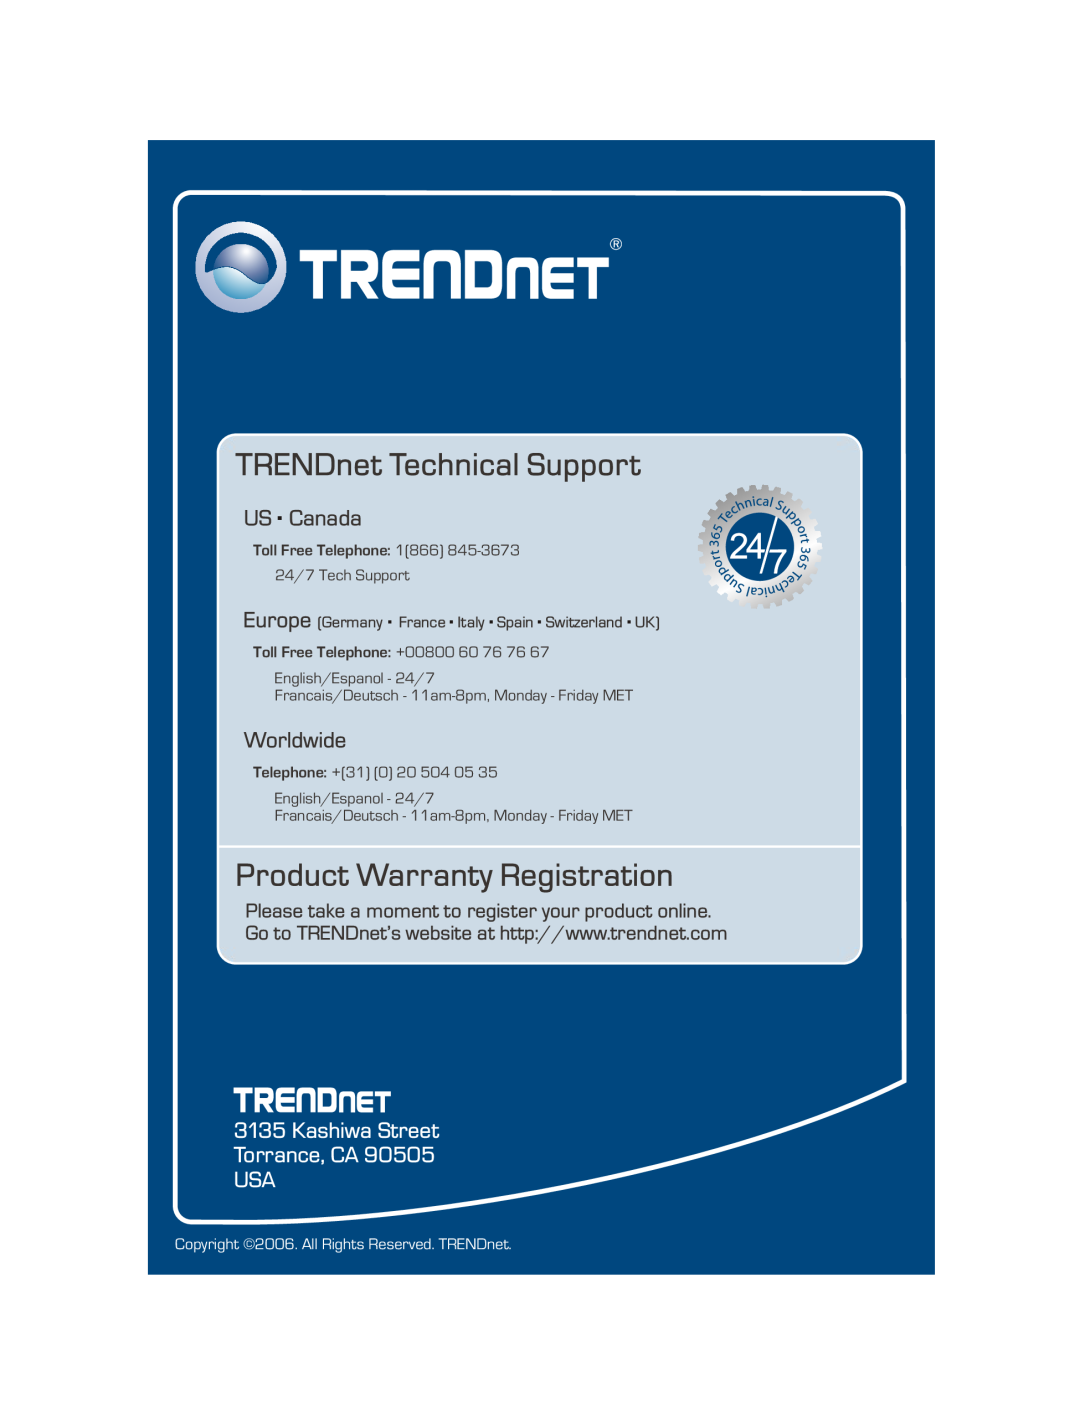 TRENDnet TEG-240WS TRENDnet Technical Support, Product Warranty Registration, US . Canada, Worldwide, Toll Free Telephone 